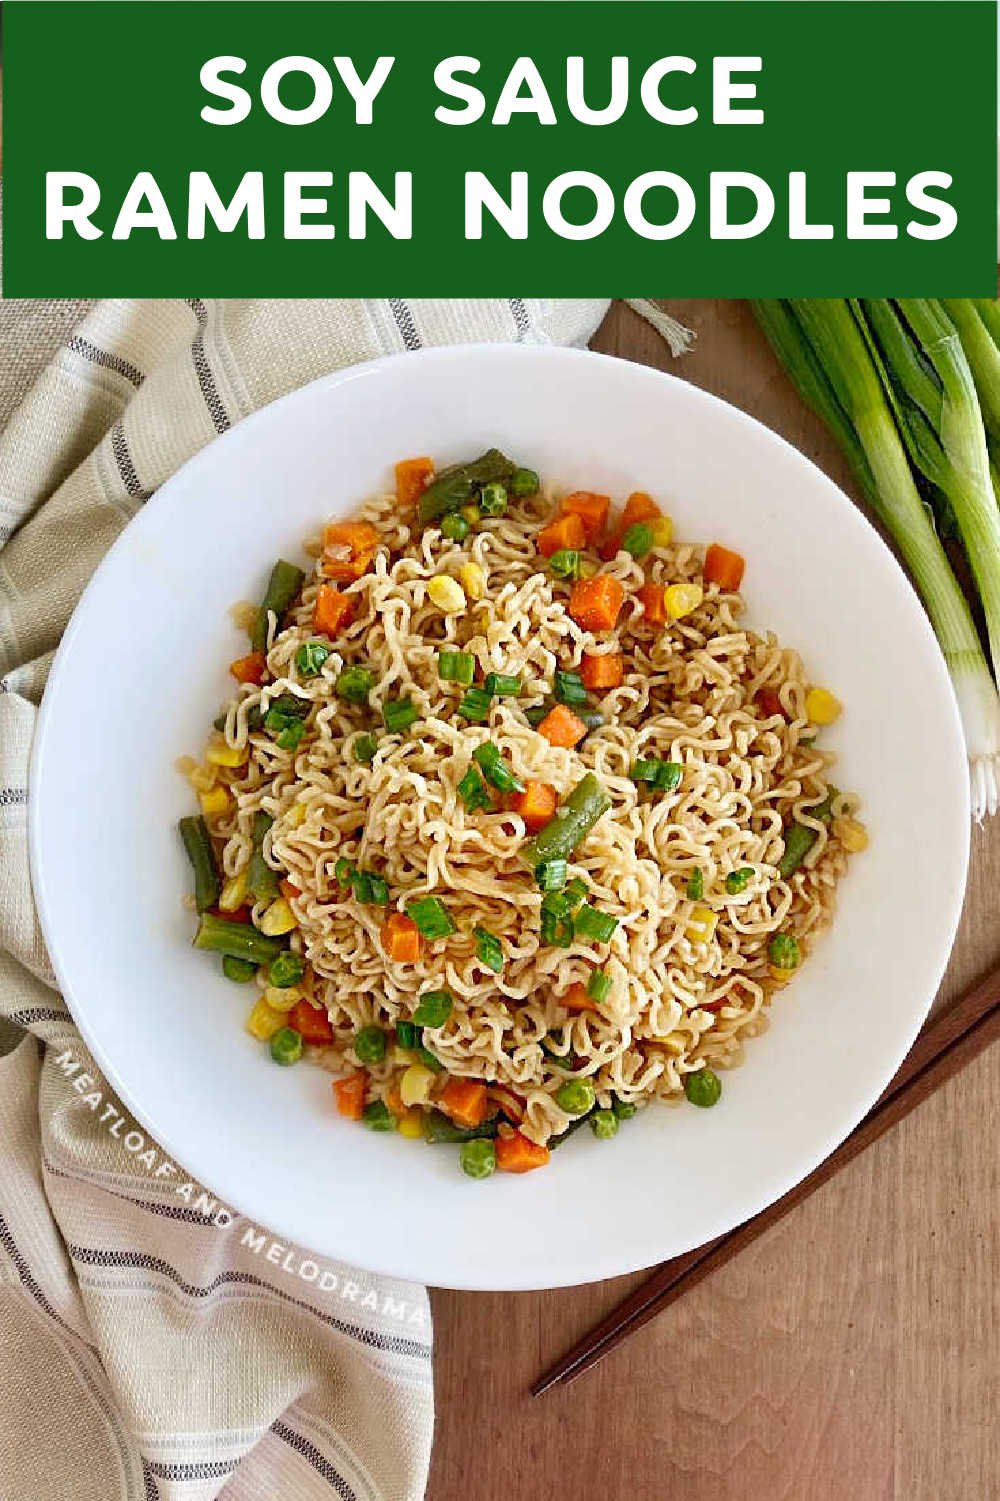 Easy Soy Sauce Ramen Noodles is a quick and easy meal made with with instant ramen noodles in a delicious homemade soy garlic sauce. Ready in 15 minutes and perfect for lunch or a quick dinner on busy weeknights! via @meamel